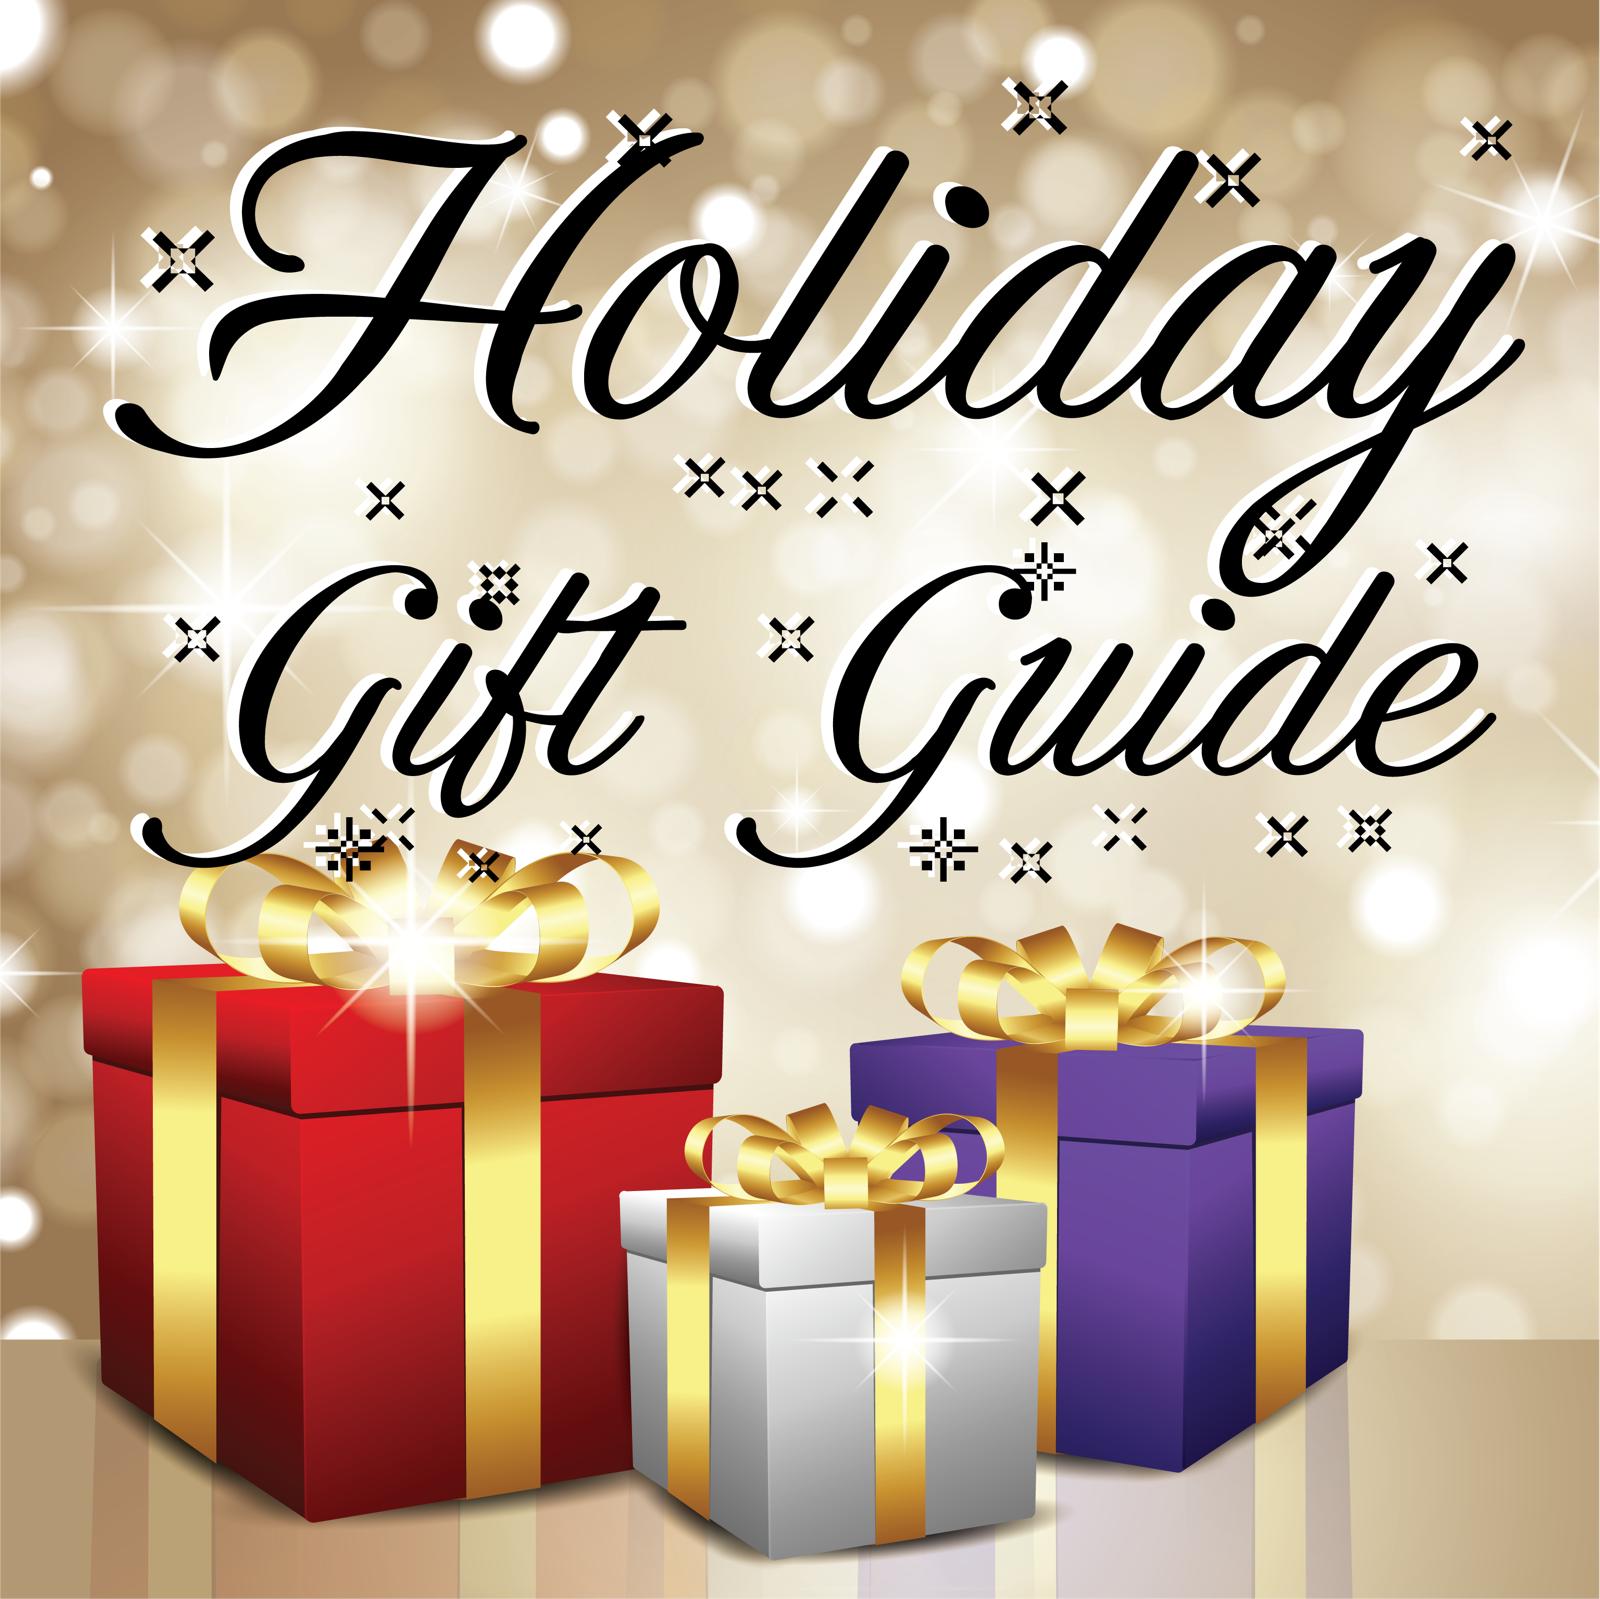 Holiday Gift Guide and round-up article illustration by Gabrielle Archuleta for 360 MAGAZINE